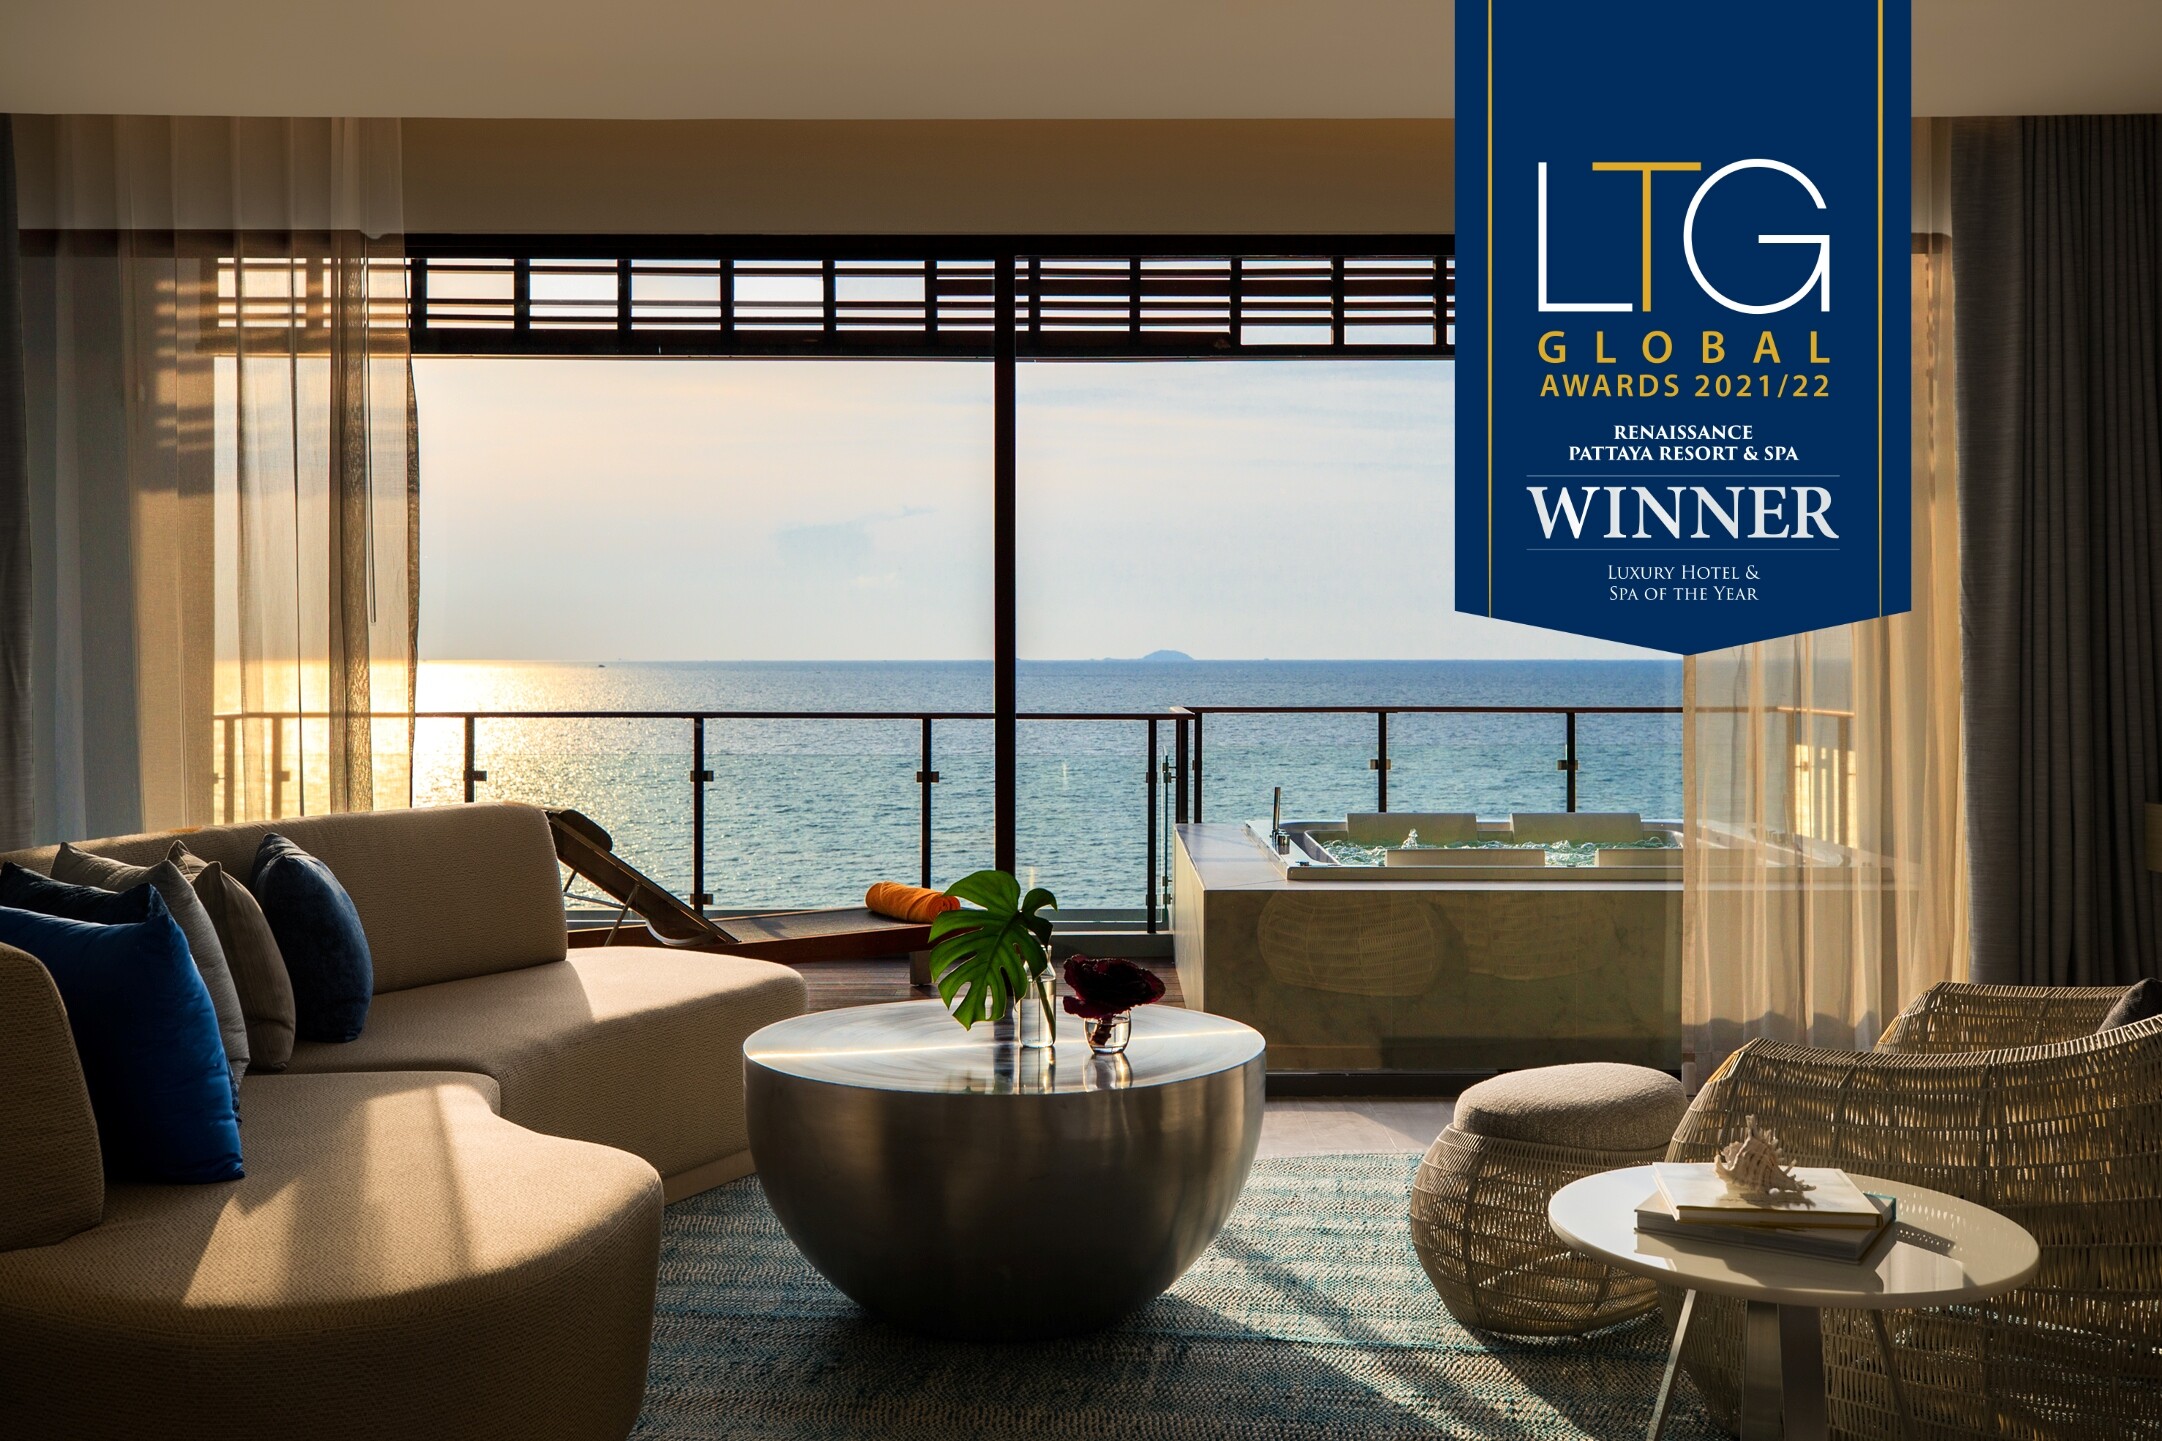 Renaissance Pattaya wins Luxury Hotel &amp; Spa of the Year from the LTG Global Awards 2021/22